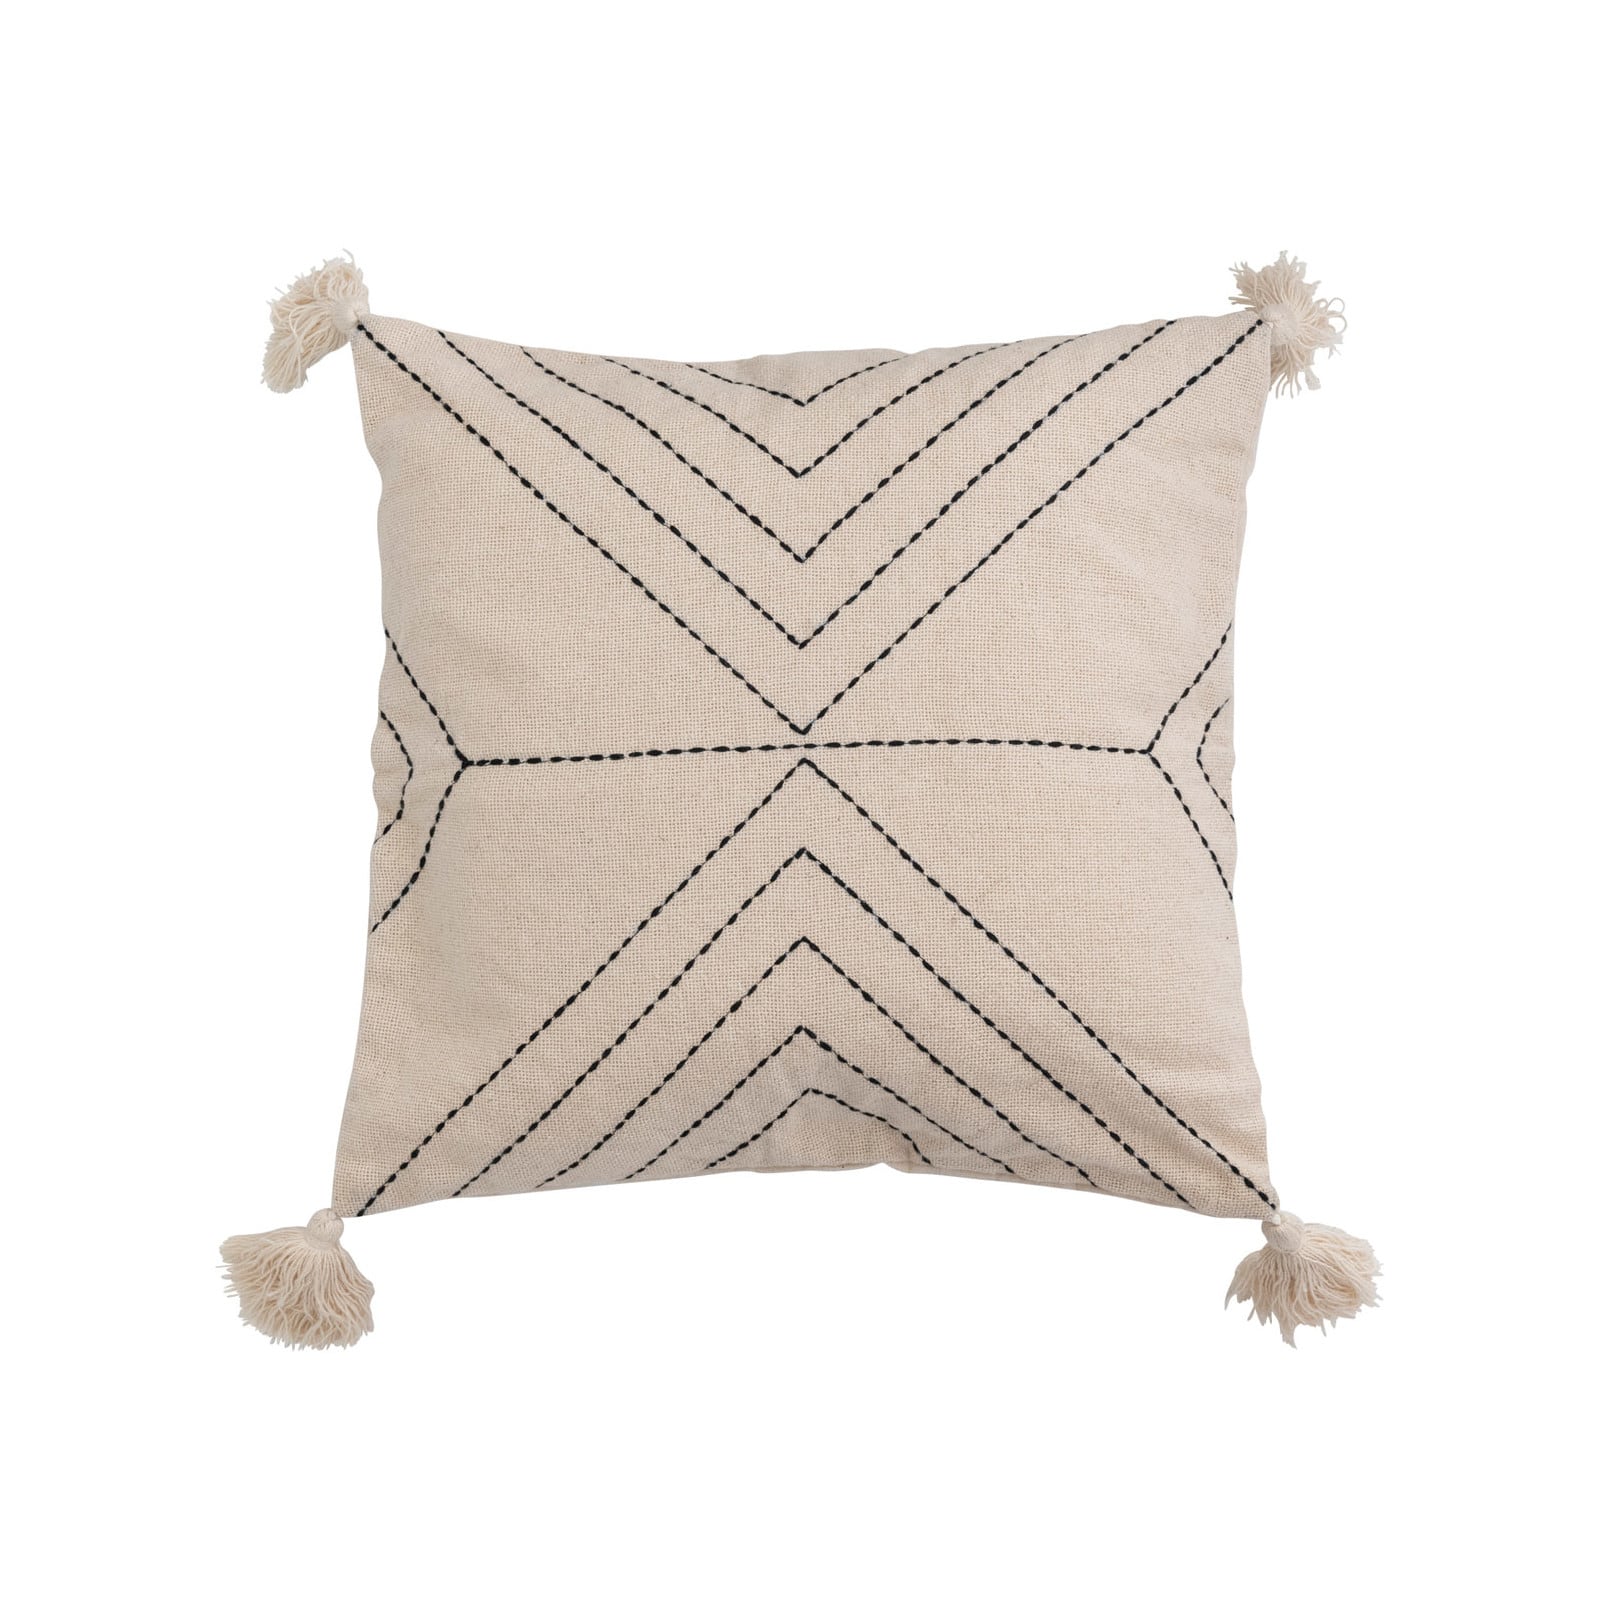 Cotton Blend Embroidered Pillow with Tassels